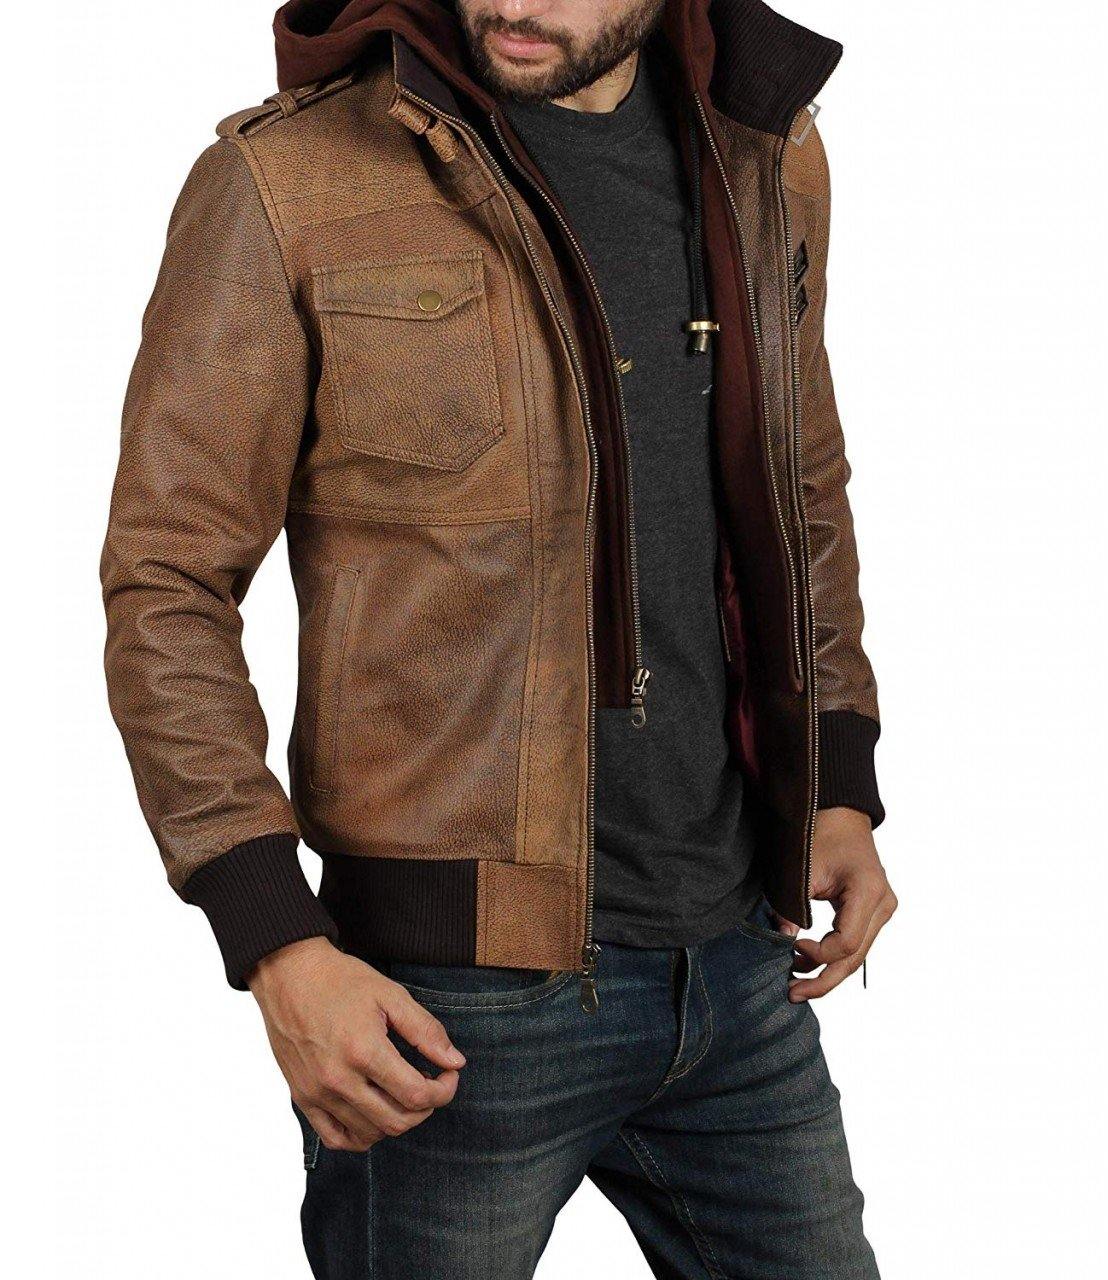 Bomber Style Distressed Brown Leather Camel Jacket with Hood - Wiseleather